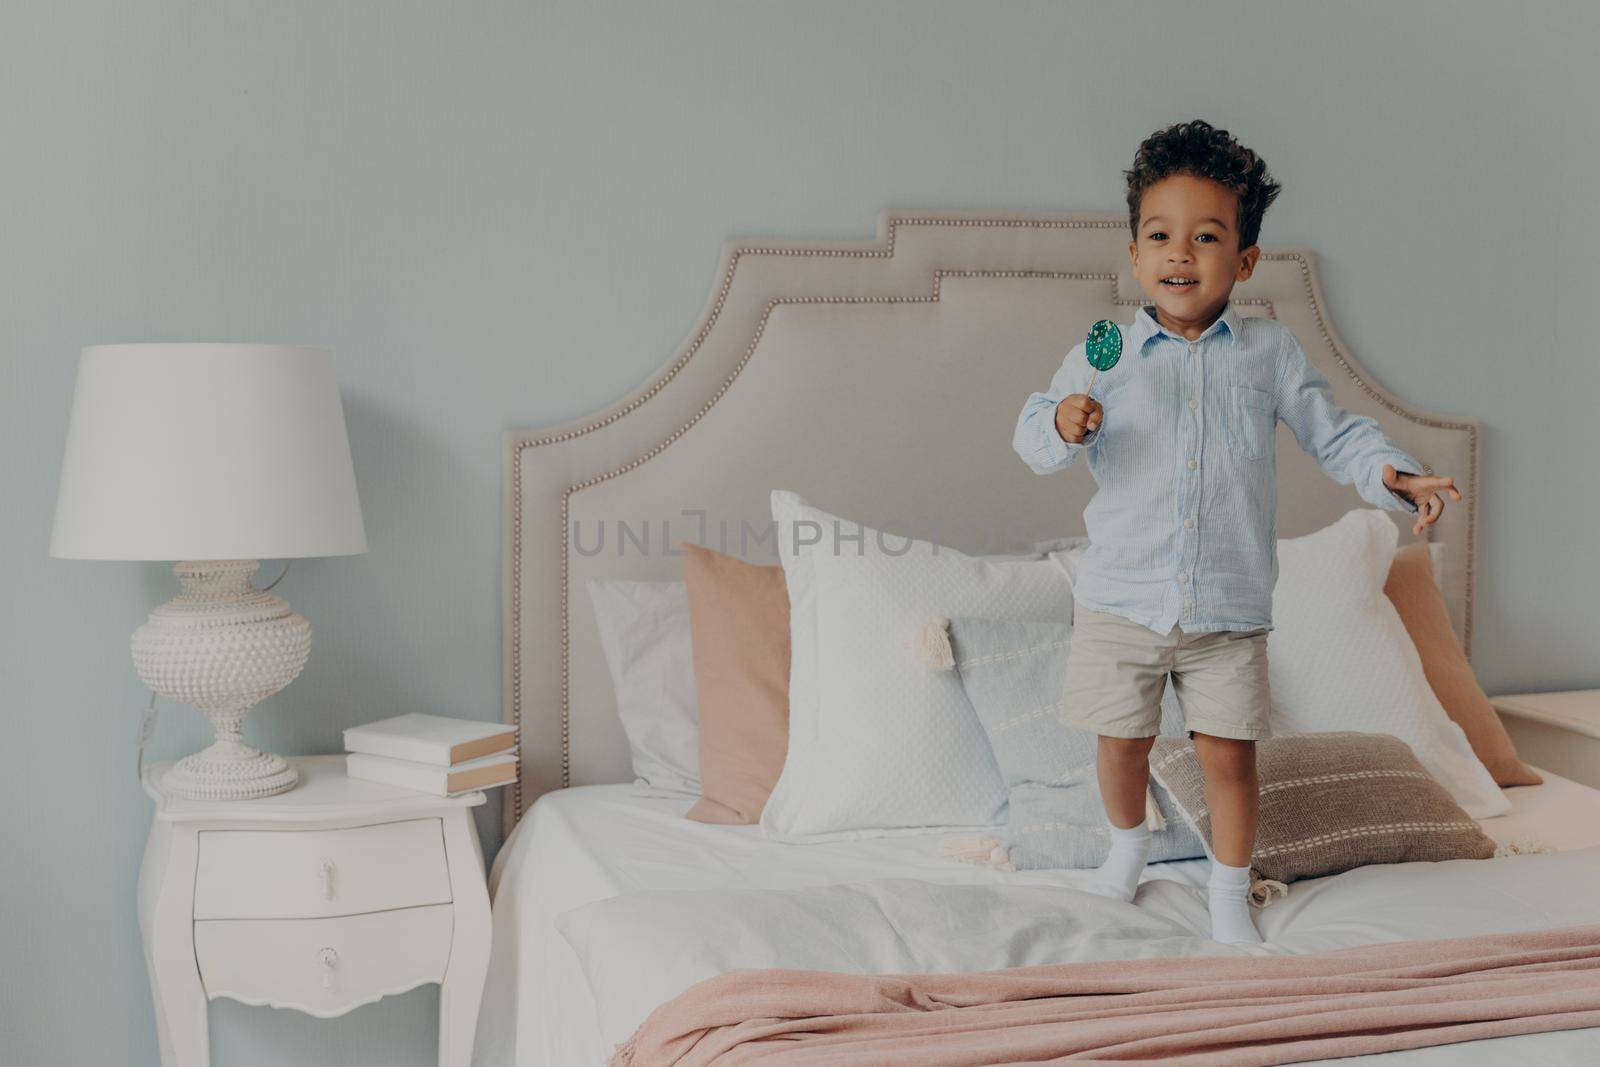 Happy playful afro american child boy with lollipop having lots of fun in bedroom, jumping on bed mattress with variety of pillows and eating candy while mom is not watching. Childhood concept